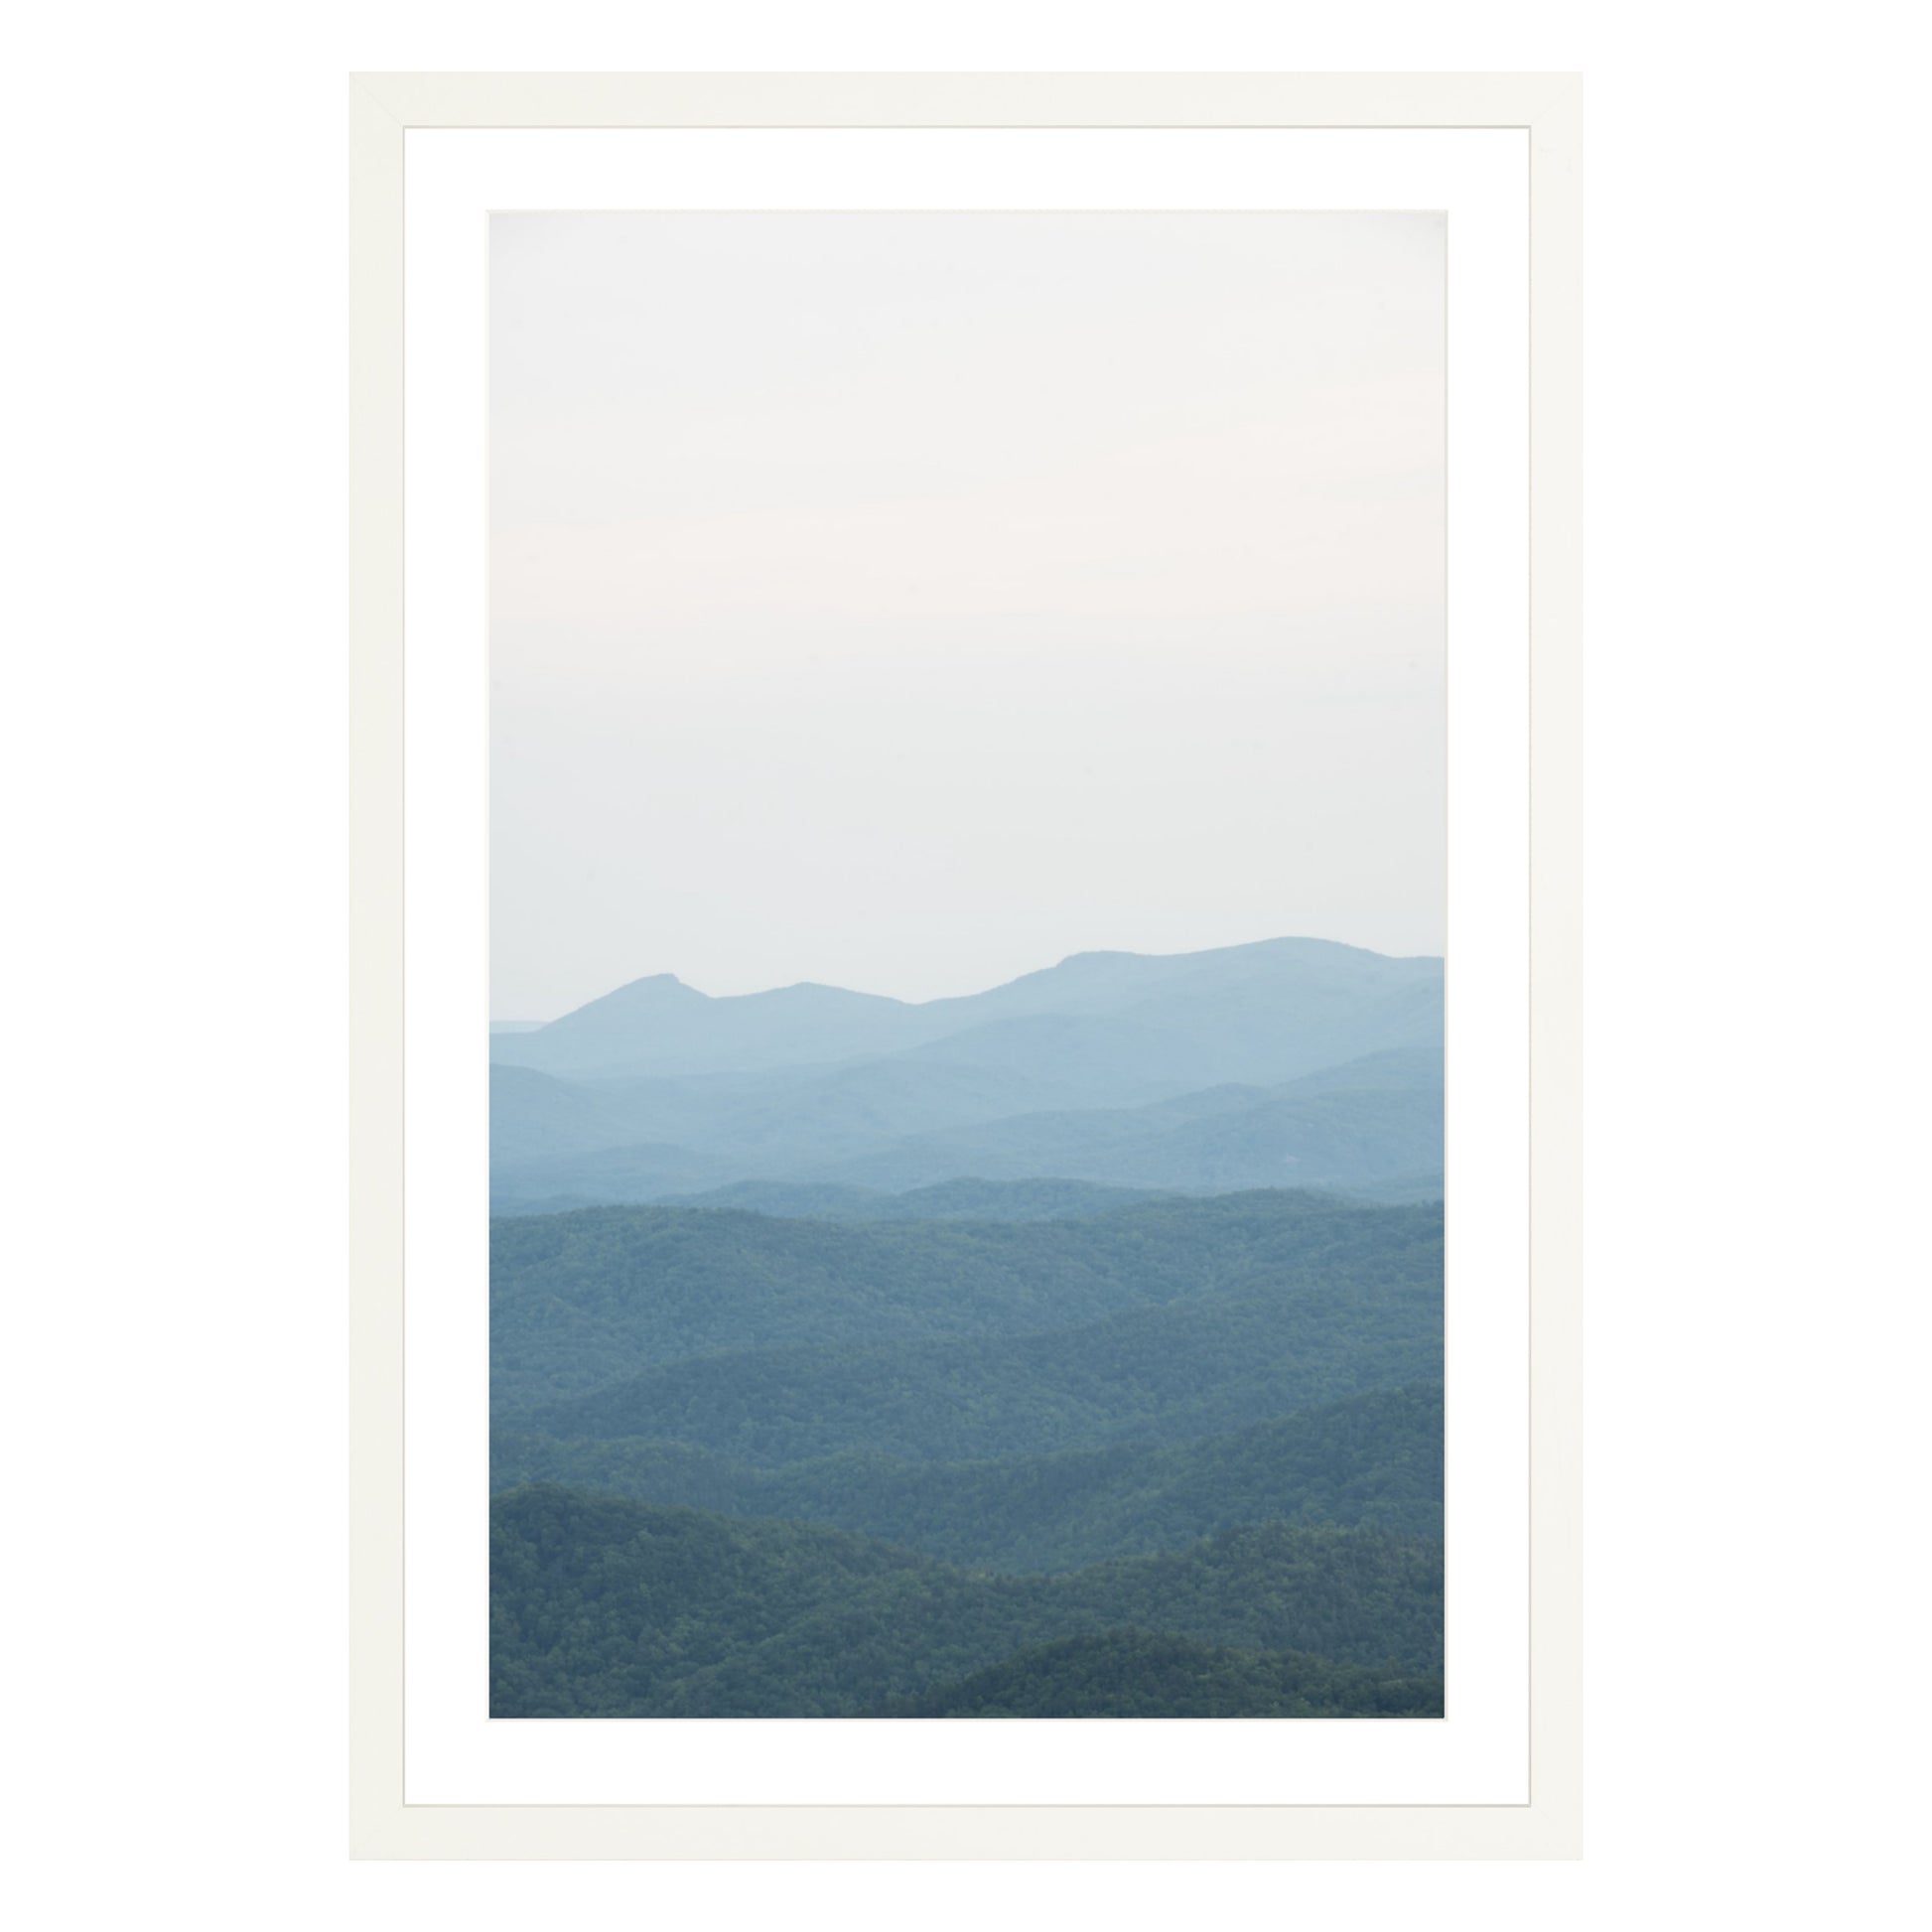 Photograph of Blue Ridge Mountains in North Carolina framed in white with white mat